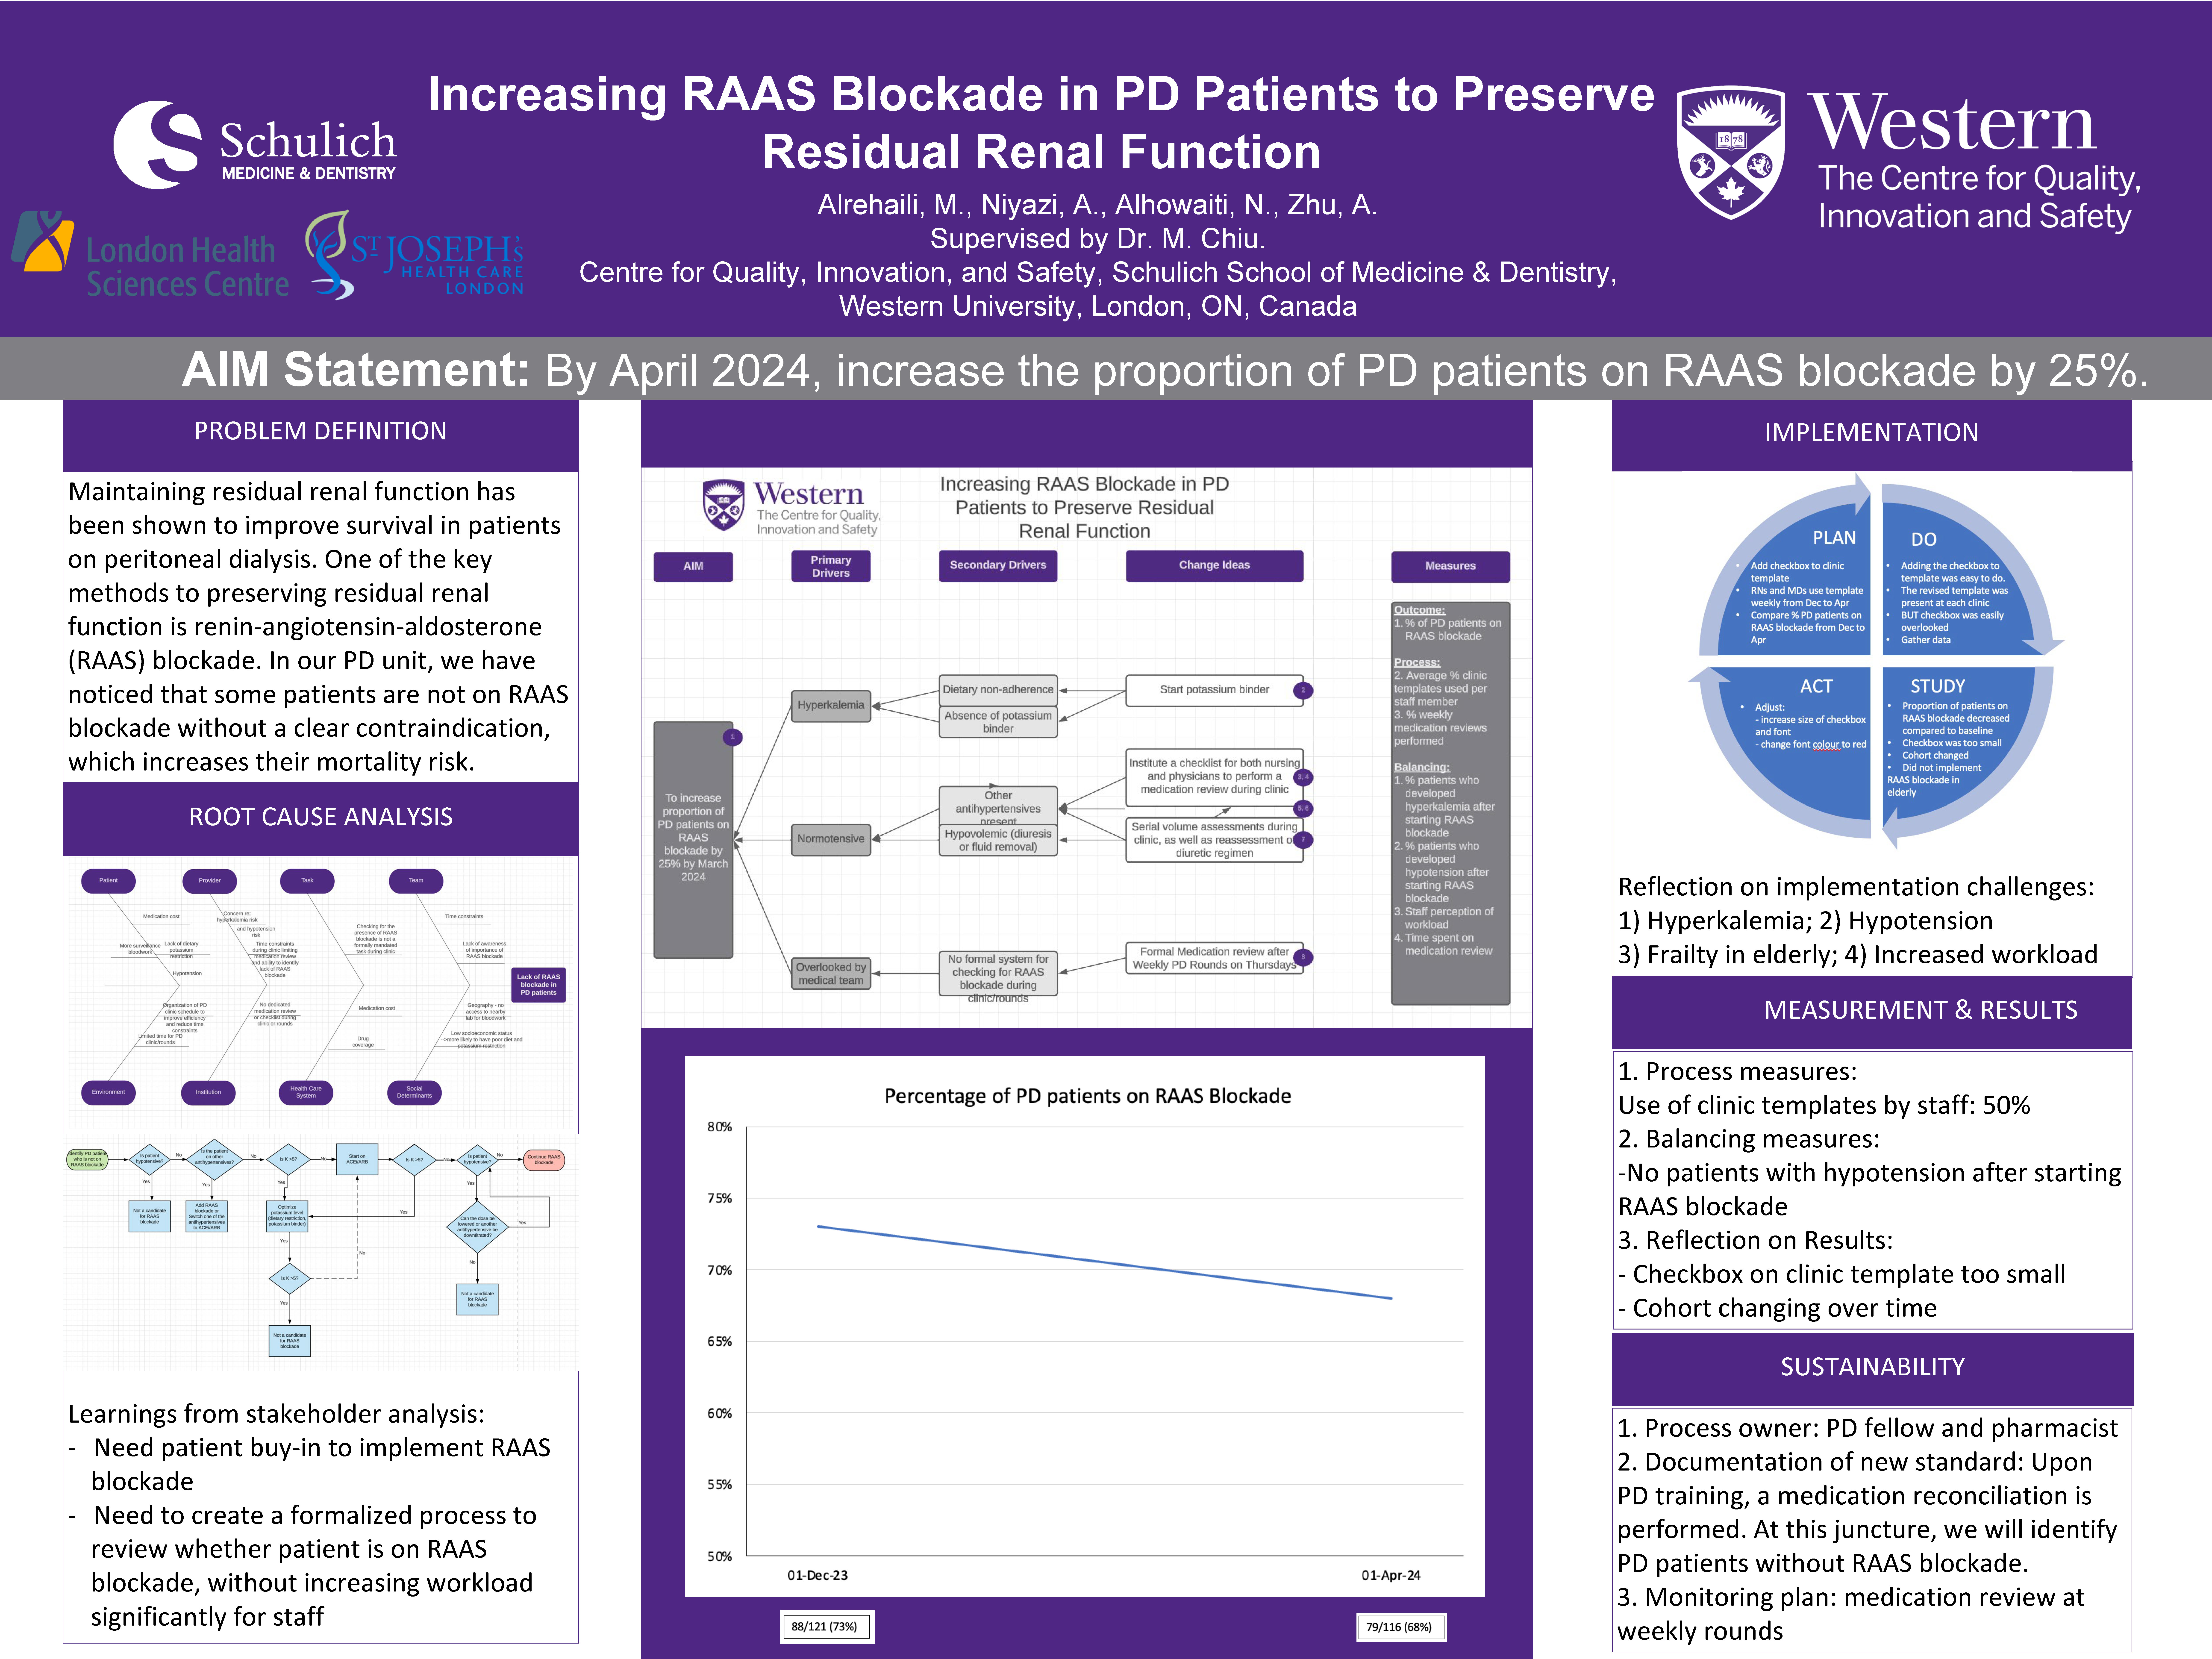 BISQ_2023-2024_Increasing_RAAS_Blockade_in_PD_Patients_to_Preserve_Residual_Renal_Function_Poster.png